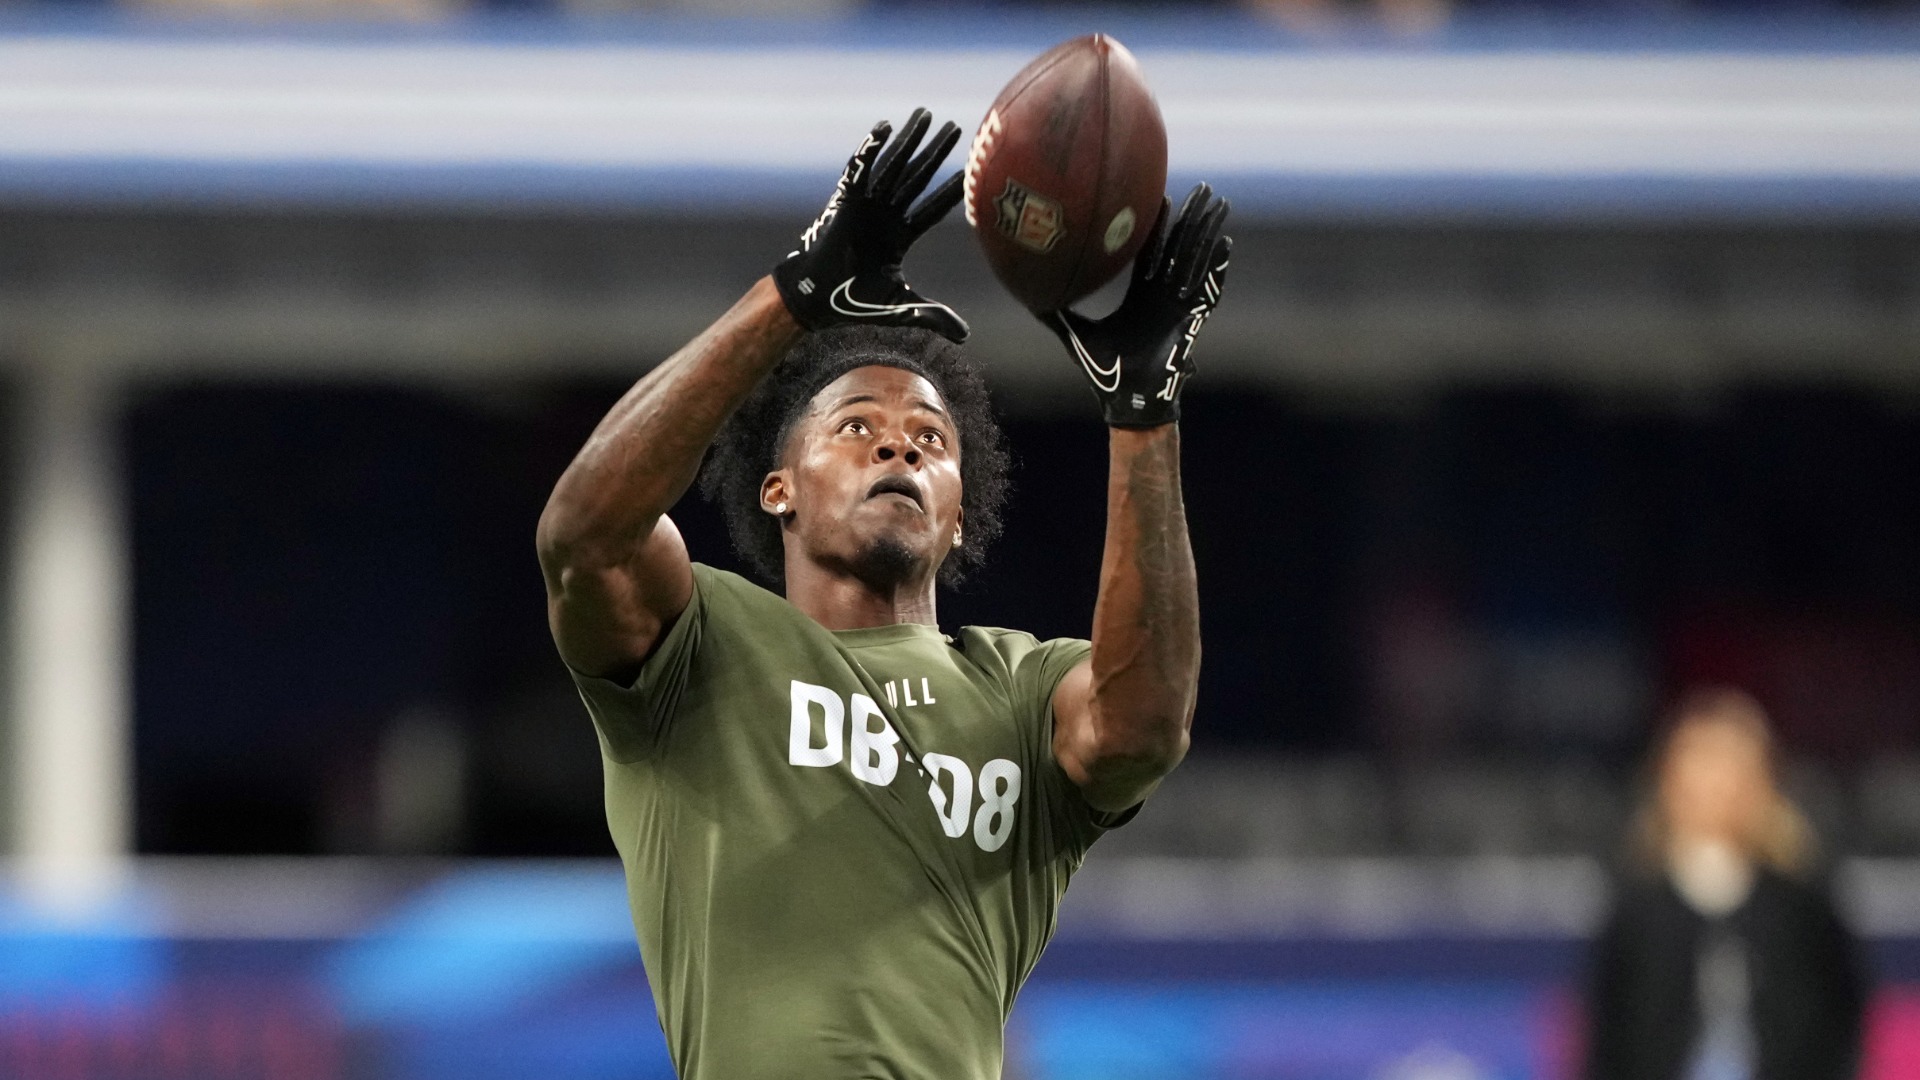 Patriots Select Cornerback With Initial Sixth-Round Pick In NFL Draft [Video]